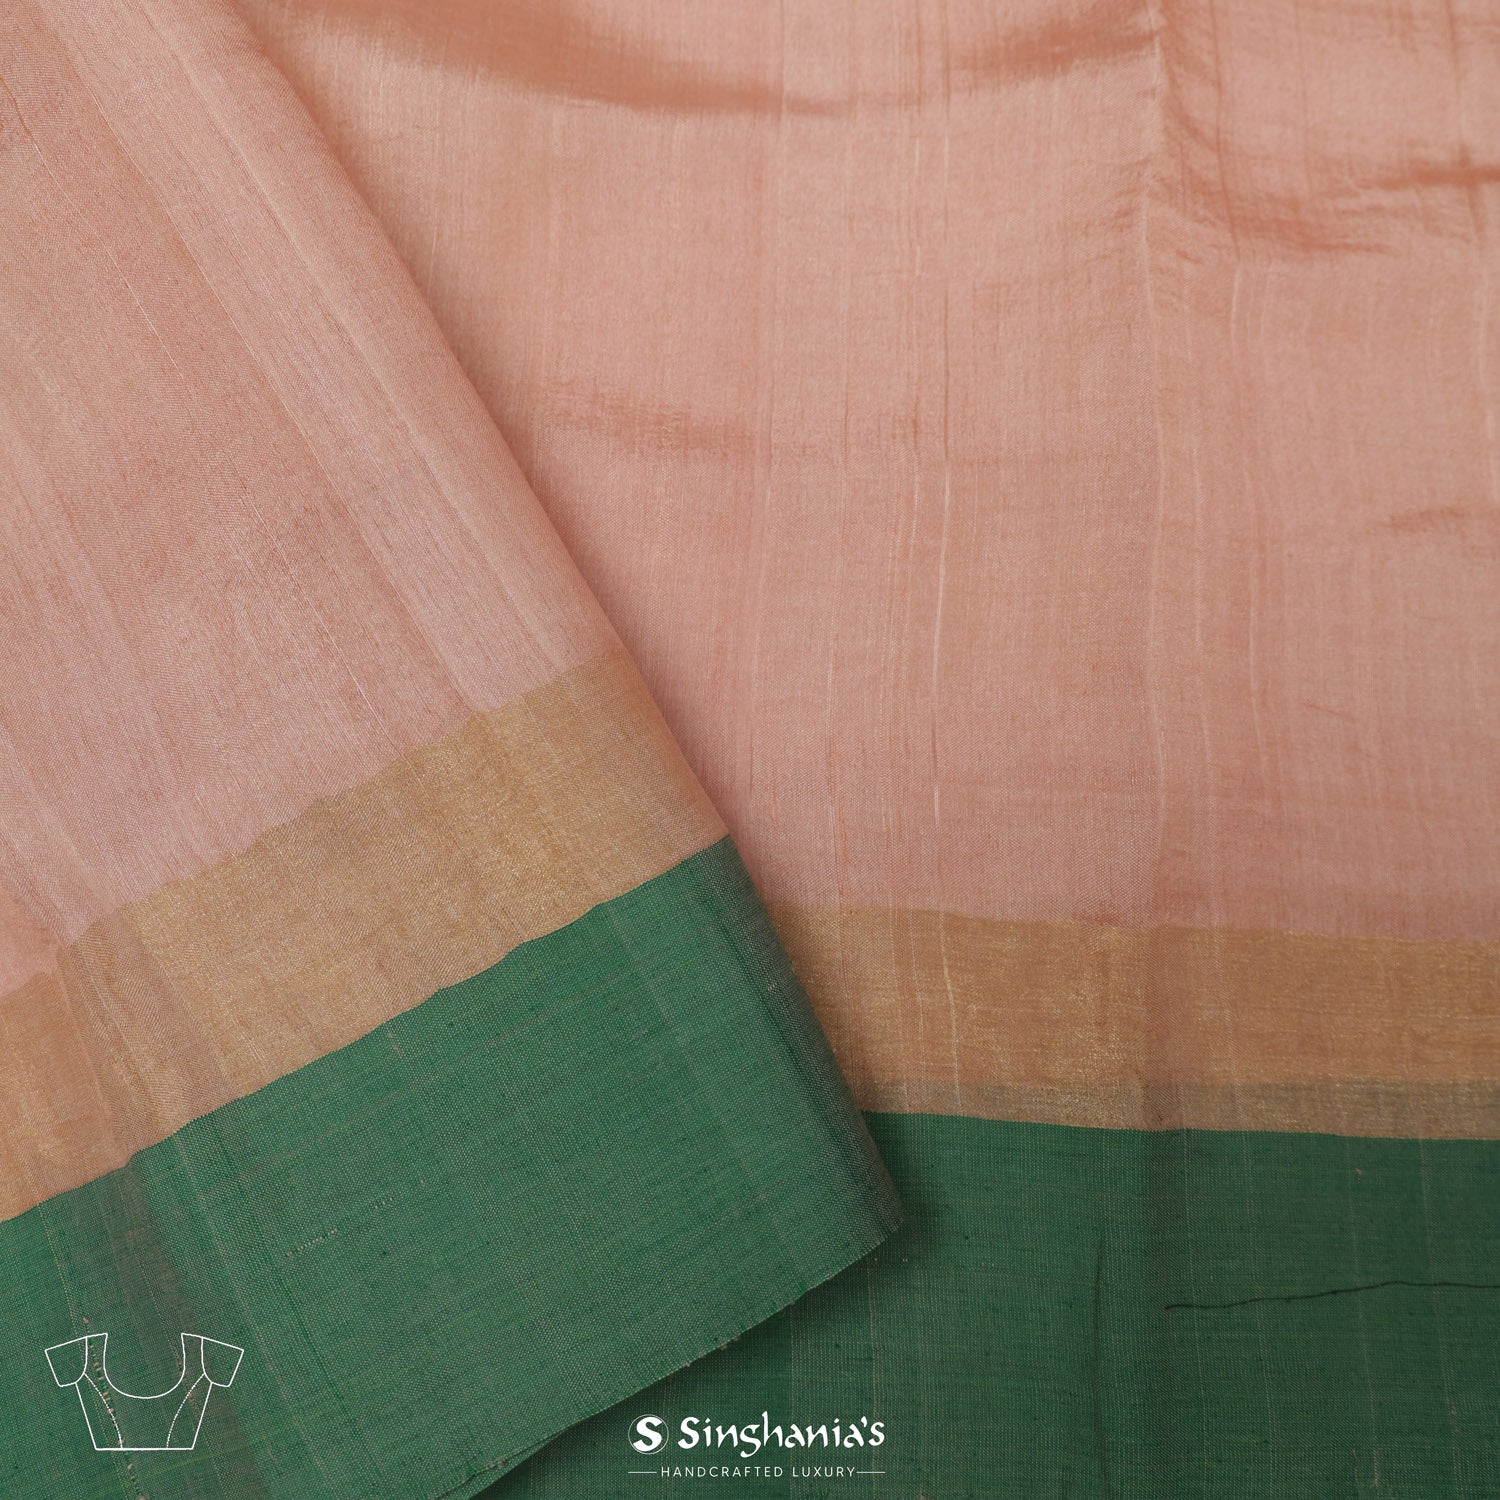 Misty Rose Pink Tussar Silk Saree With Printed Floral Pattern